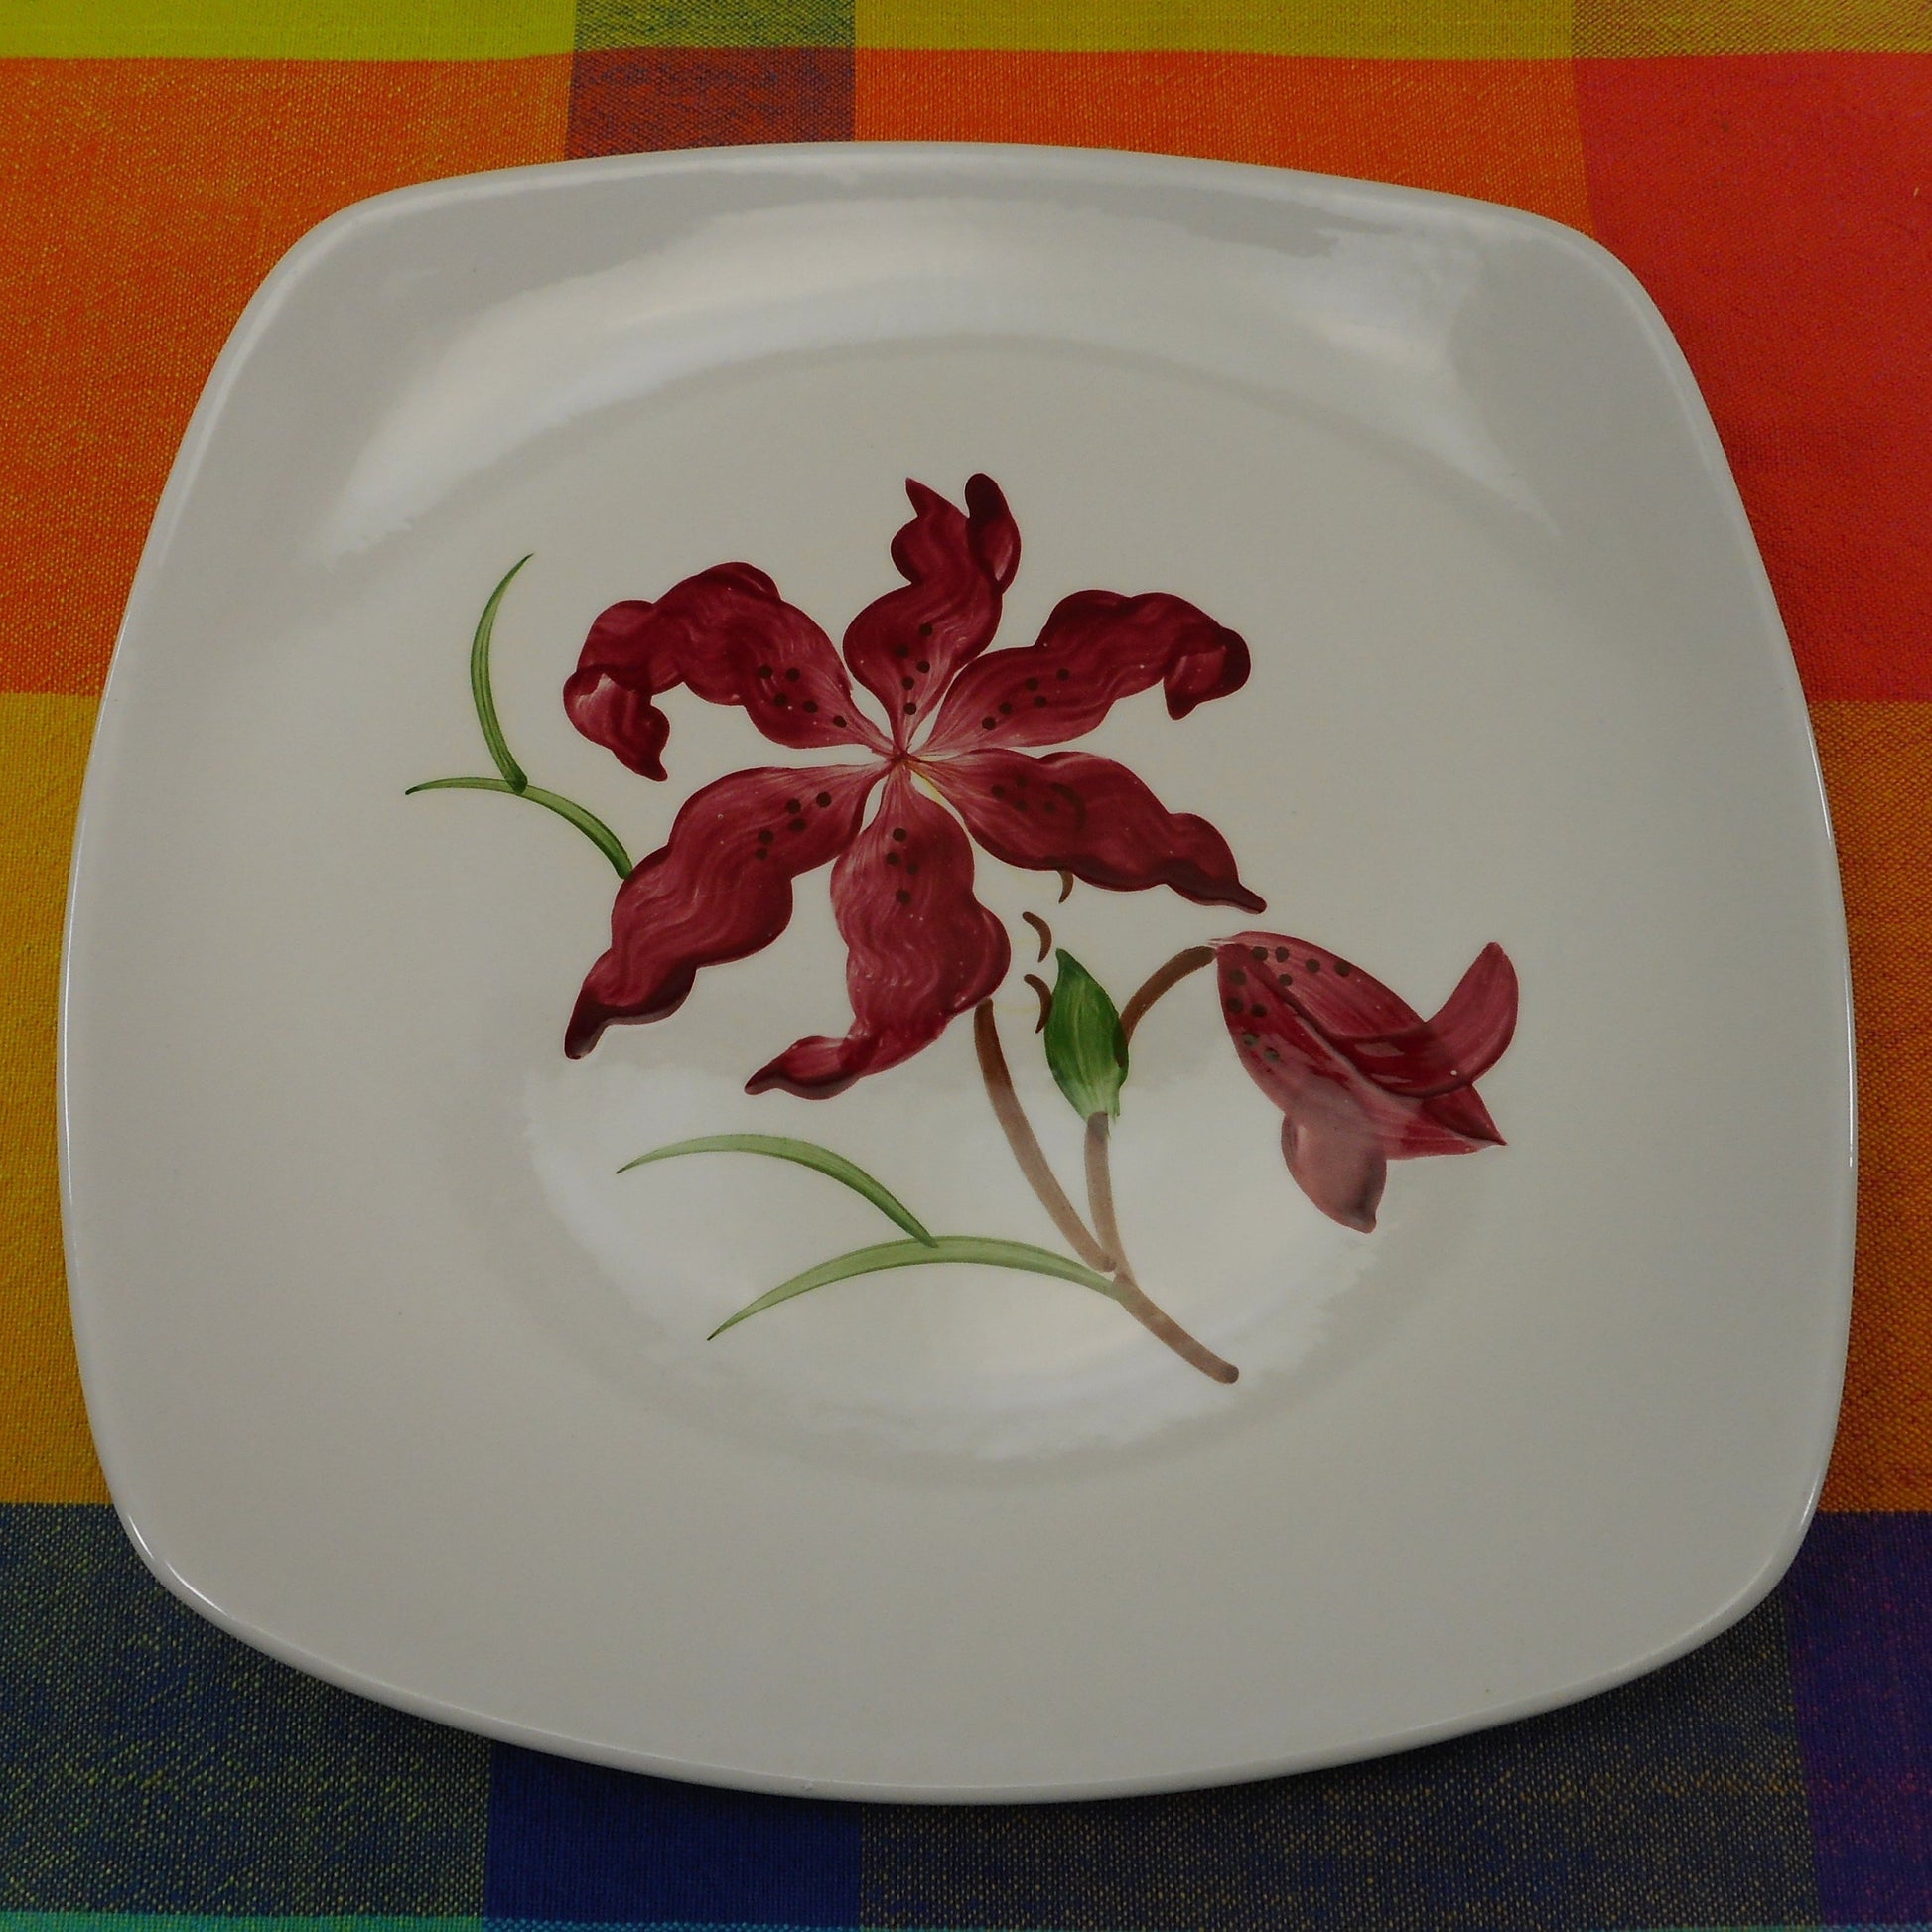 Orchard Ware California Pottery Red Lily Flower - Square Dinner Plate 9-7/8"